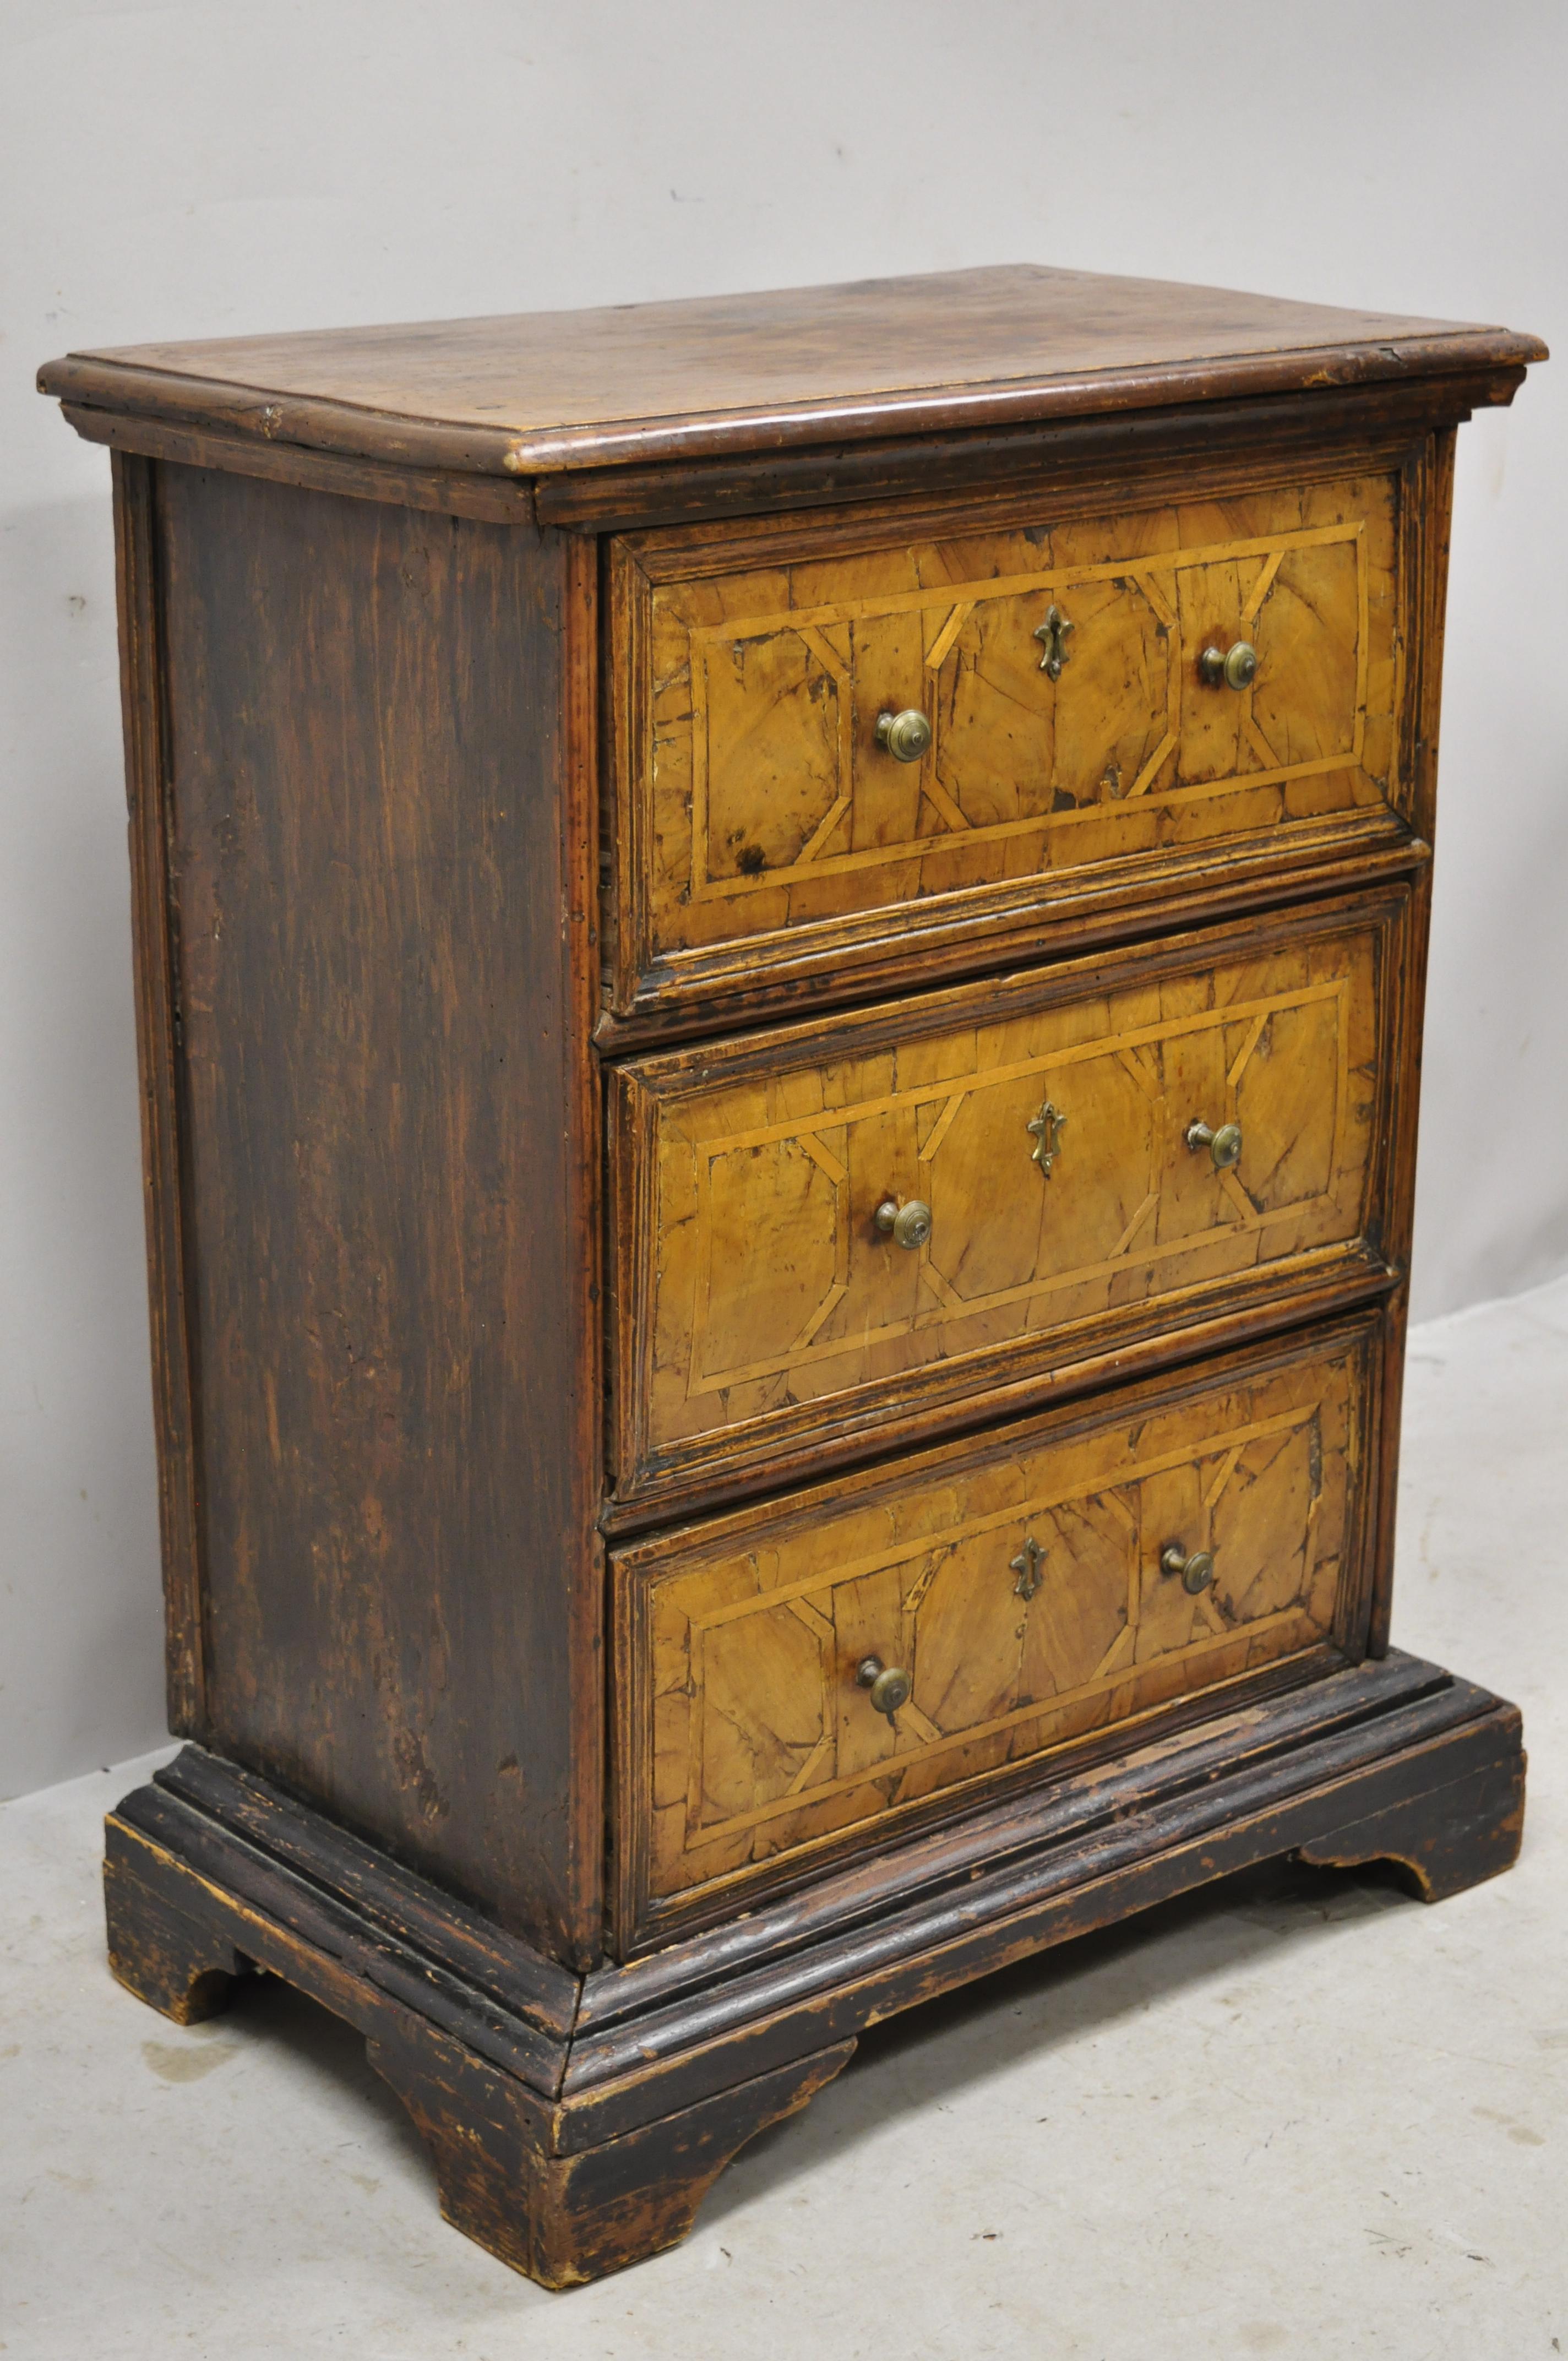 19th century Italian marquetry inlay walnut 3-drawer commode chest nightstand. Item features remarkable aged patina, marquetry or parquetry inlay, solid wood construction, beautiful wood grain, 3 drawers, solid brass hardware, circa 19th century.